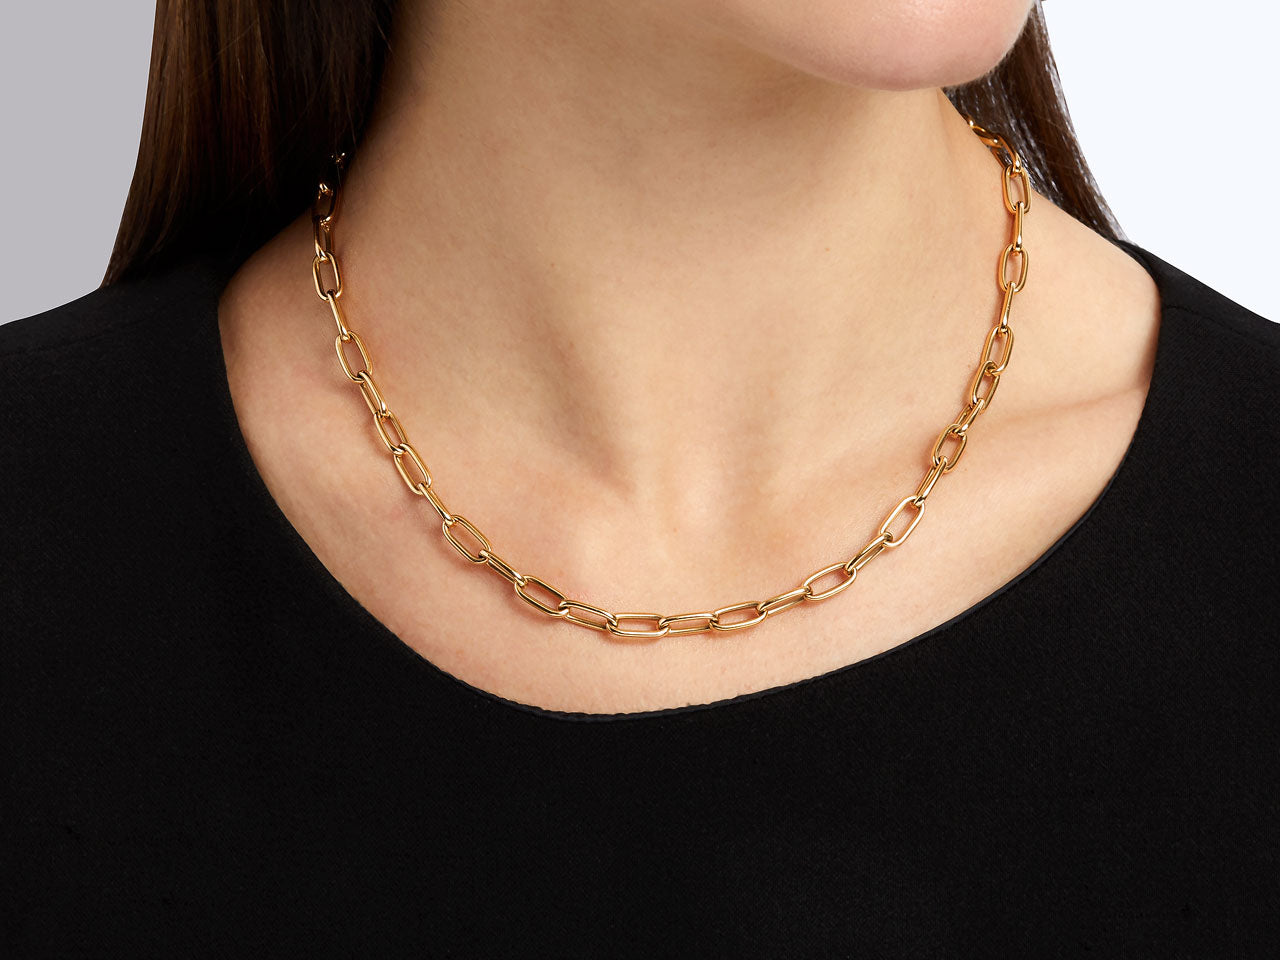 Italian Oval Link Gold Chain in 18K Gold, by Beladora